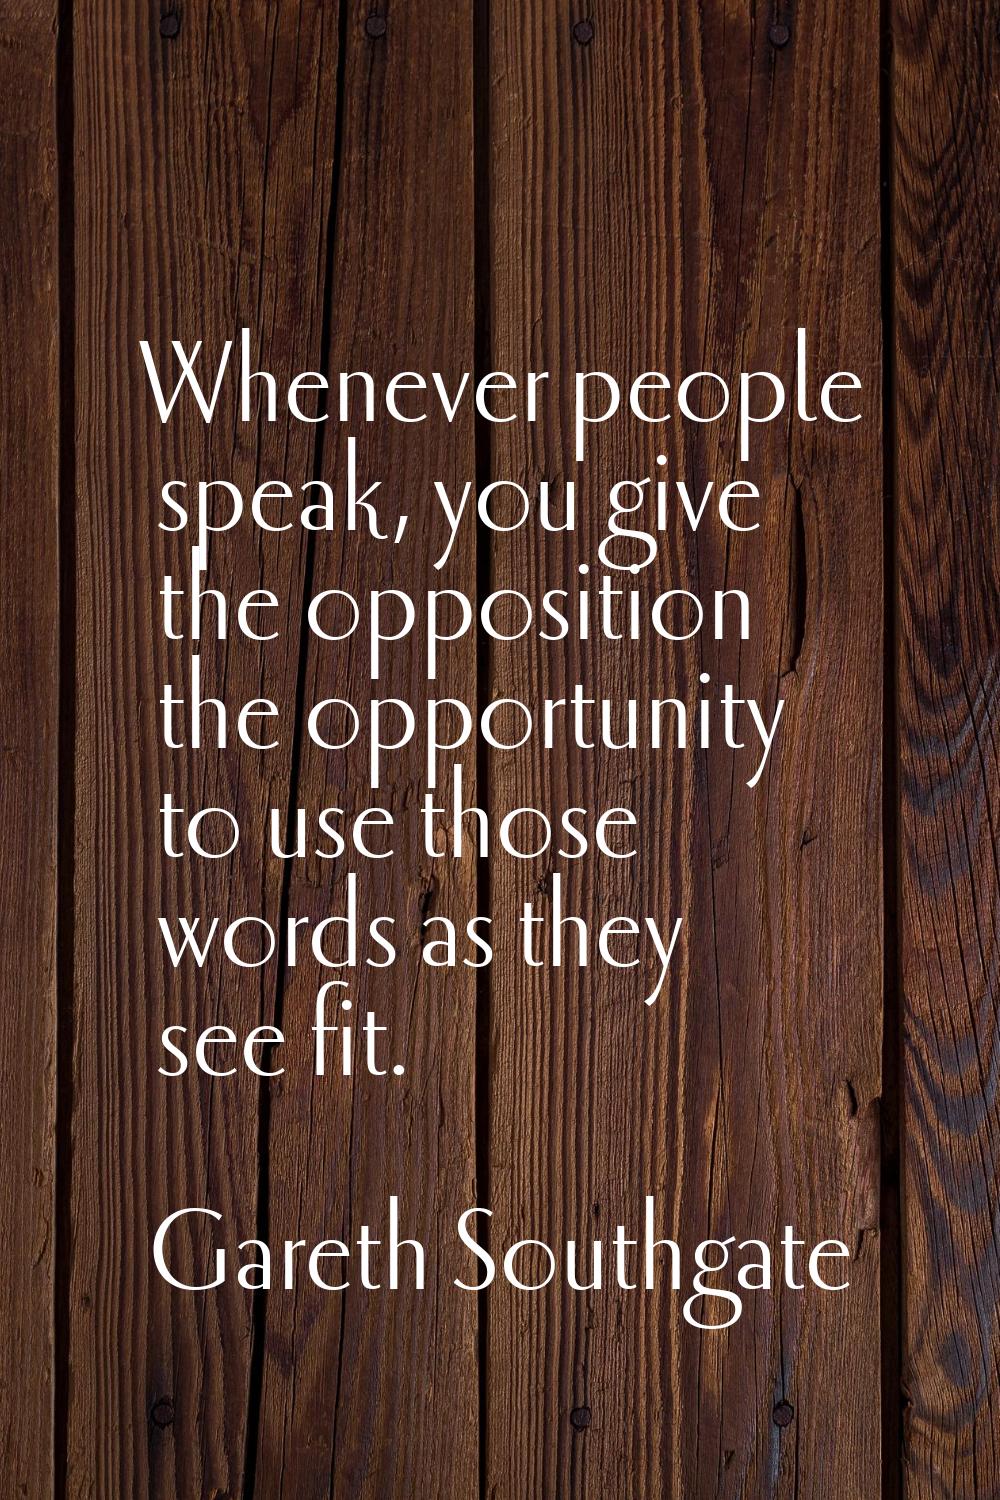 Whenever people speak, you give the opposition the opportunity to use those words as they see fit.